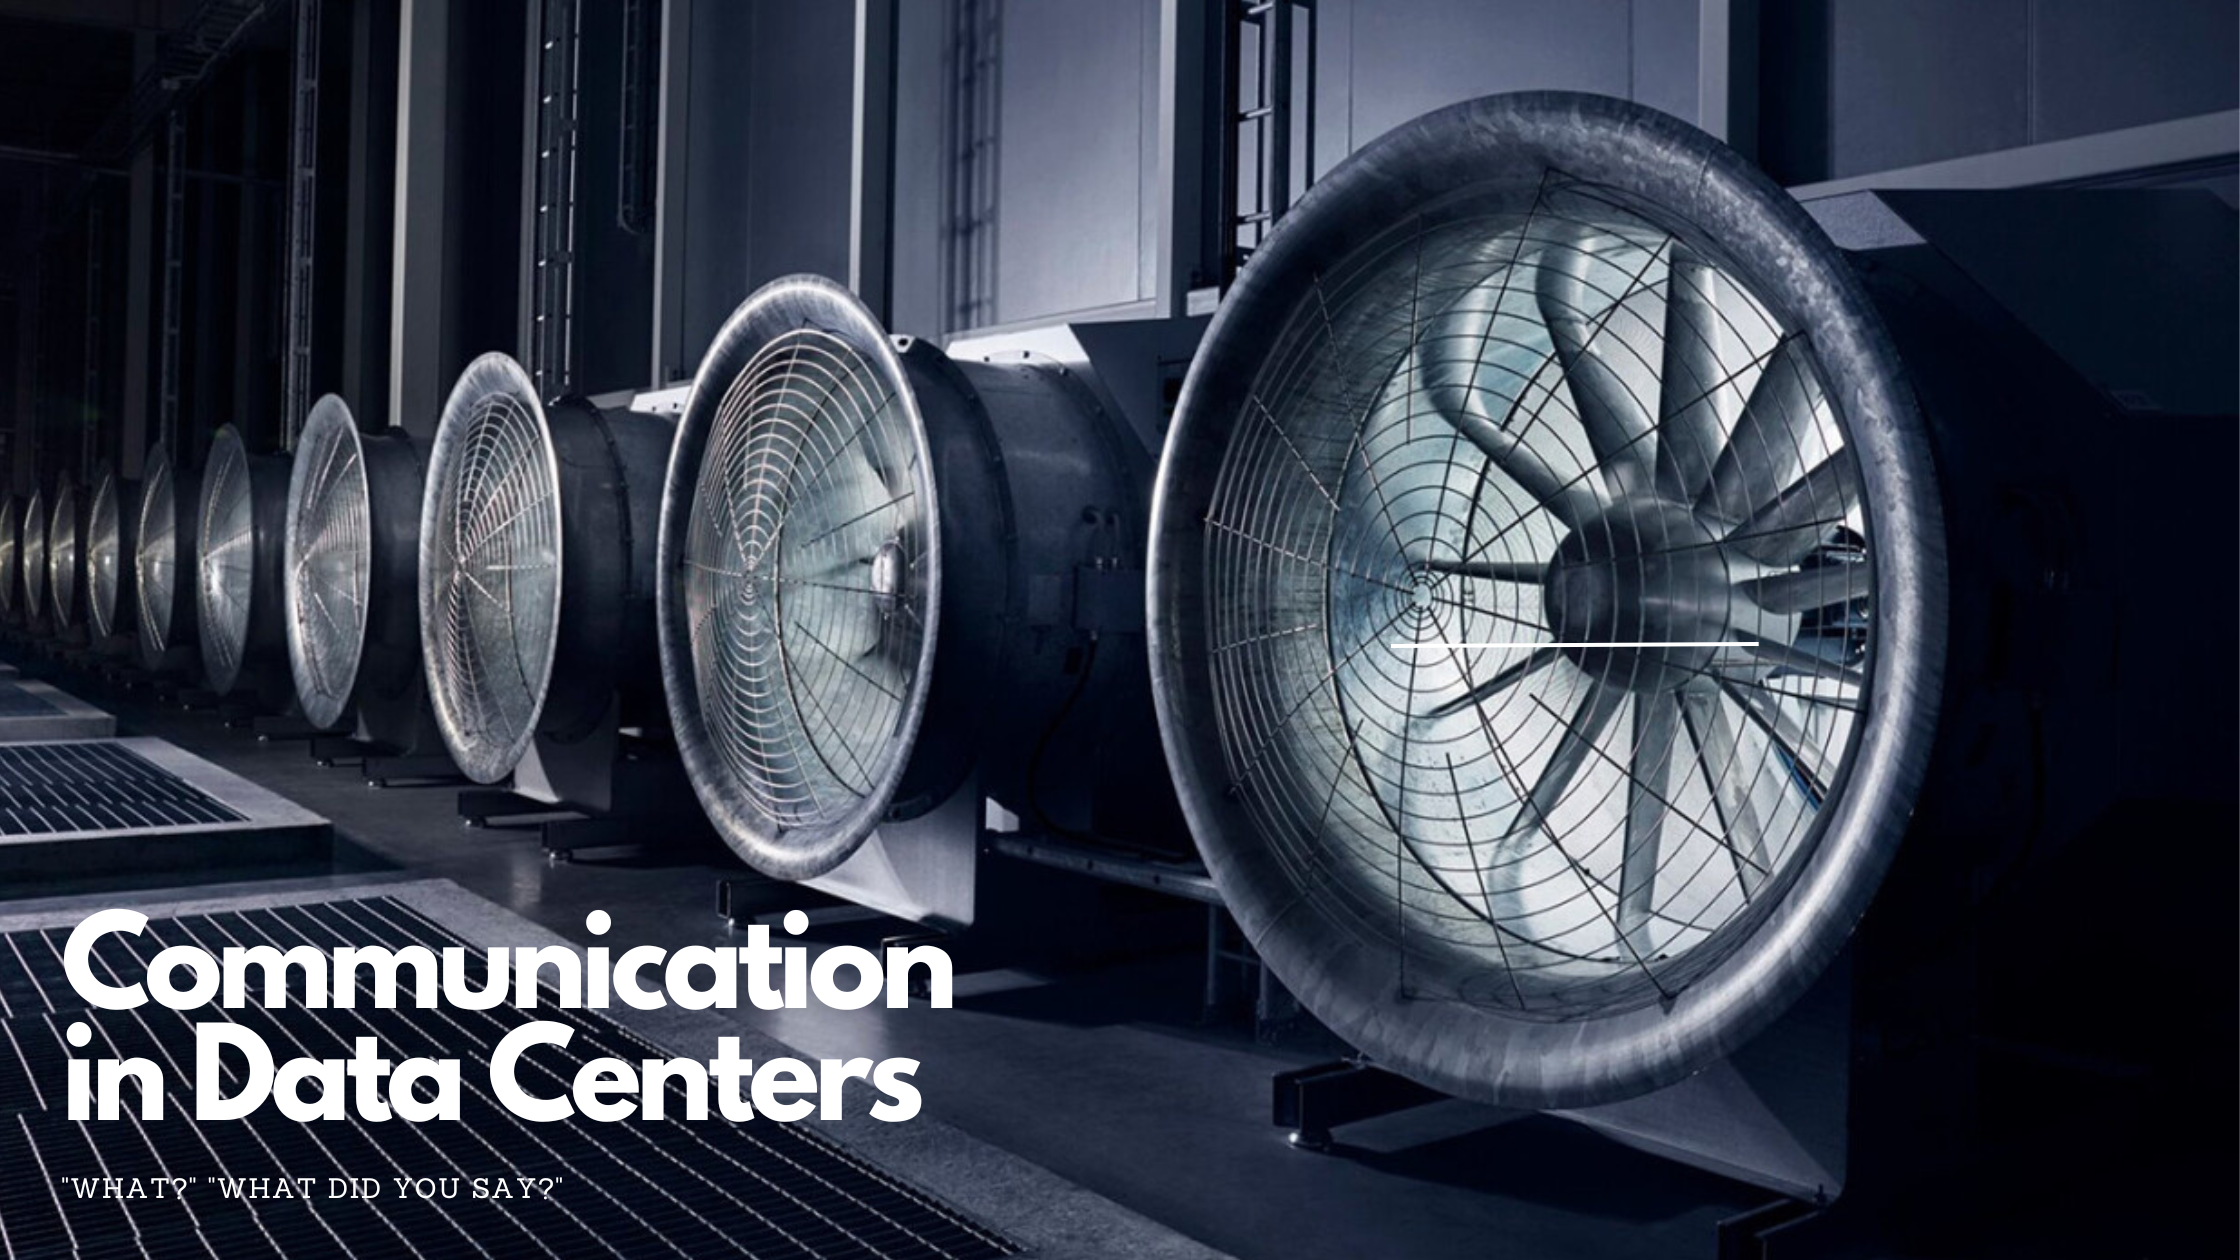 Why is Communication Paramount in Data Centers?